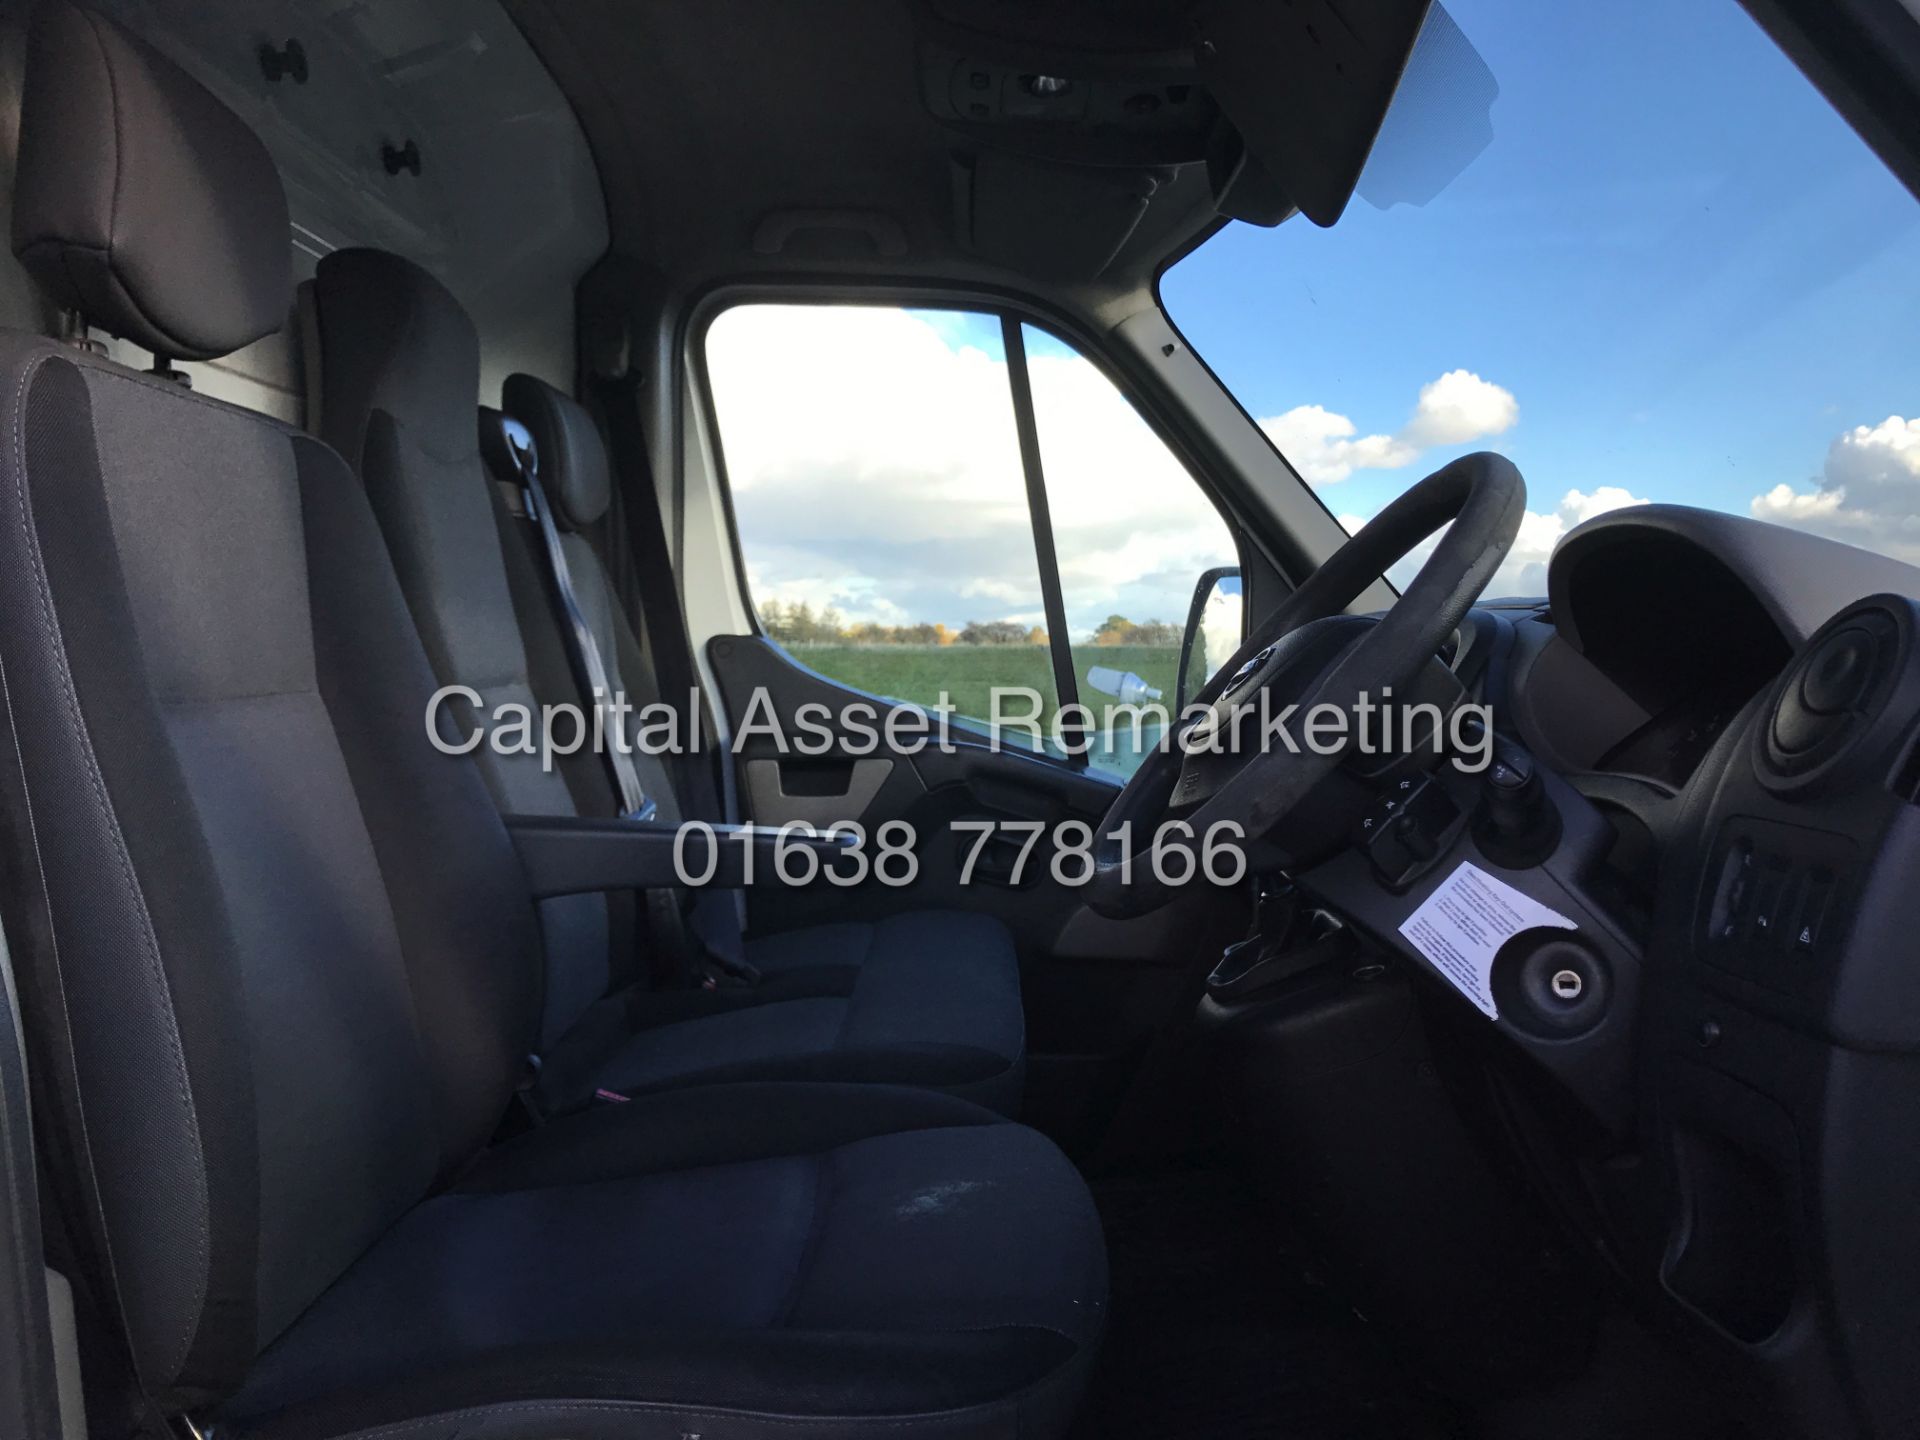 NISSAN NV400 2.3DCI "SE" F35.13 LWB/HI TOP "FRIDGE/FREEZER" 2015 MODEL - THERMO KING UNIT "STAND BY" - Image 9 of 17